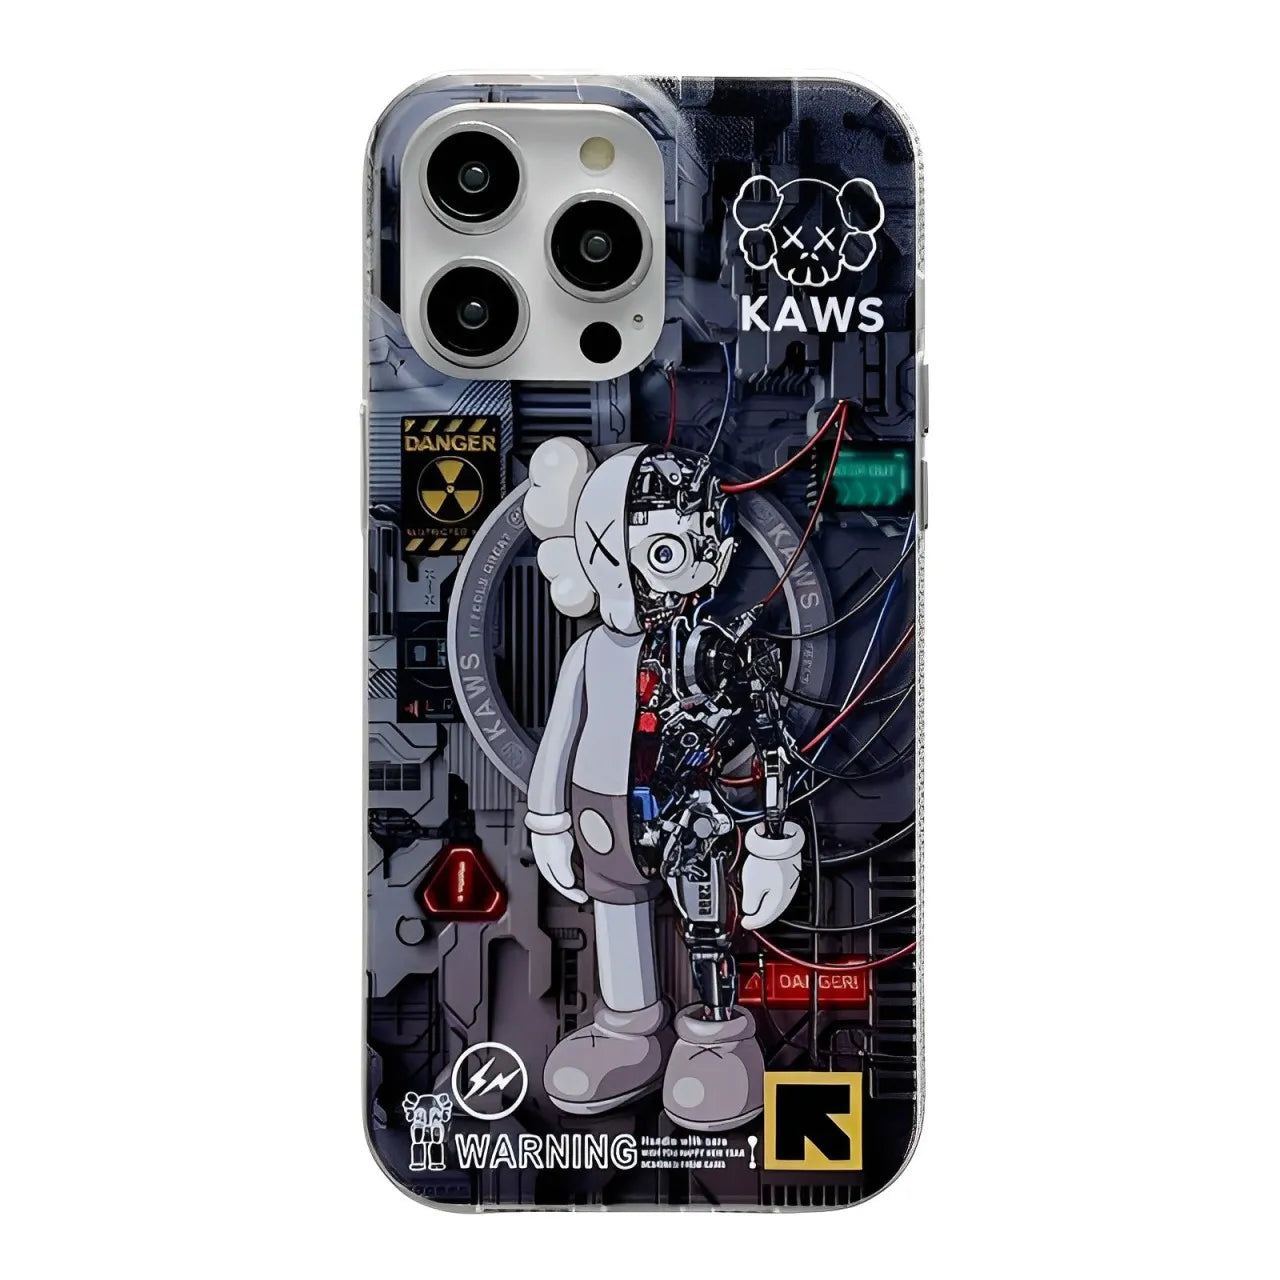 Anime Characters iPhone Case -supports MagSafe